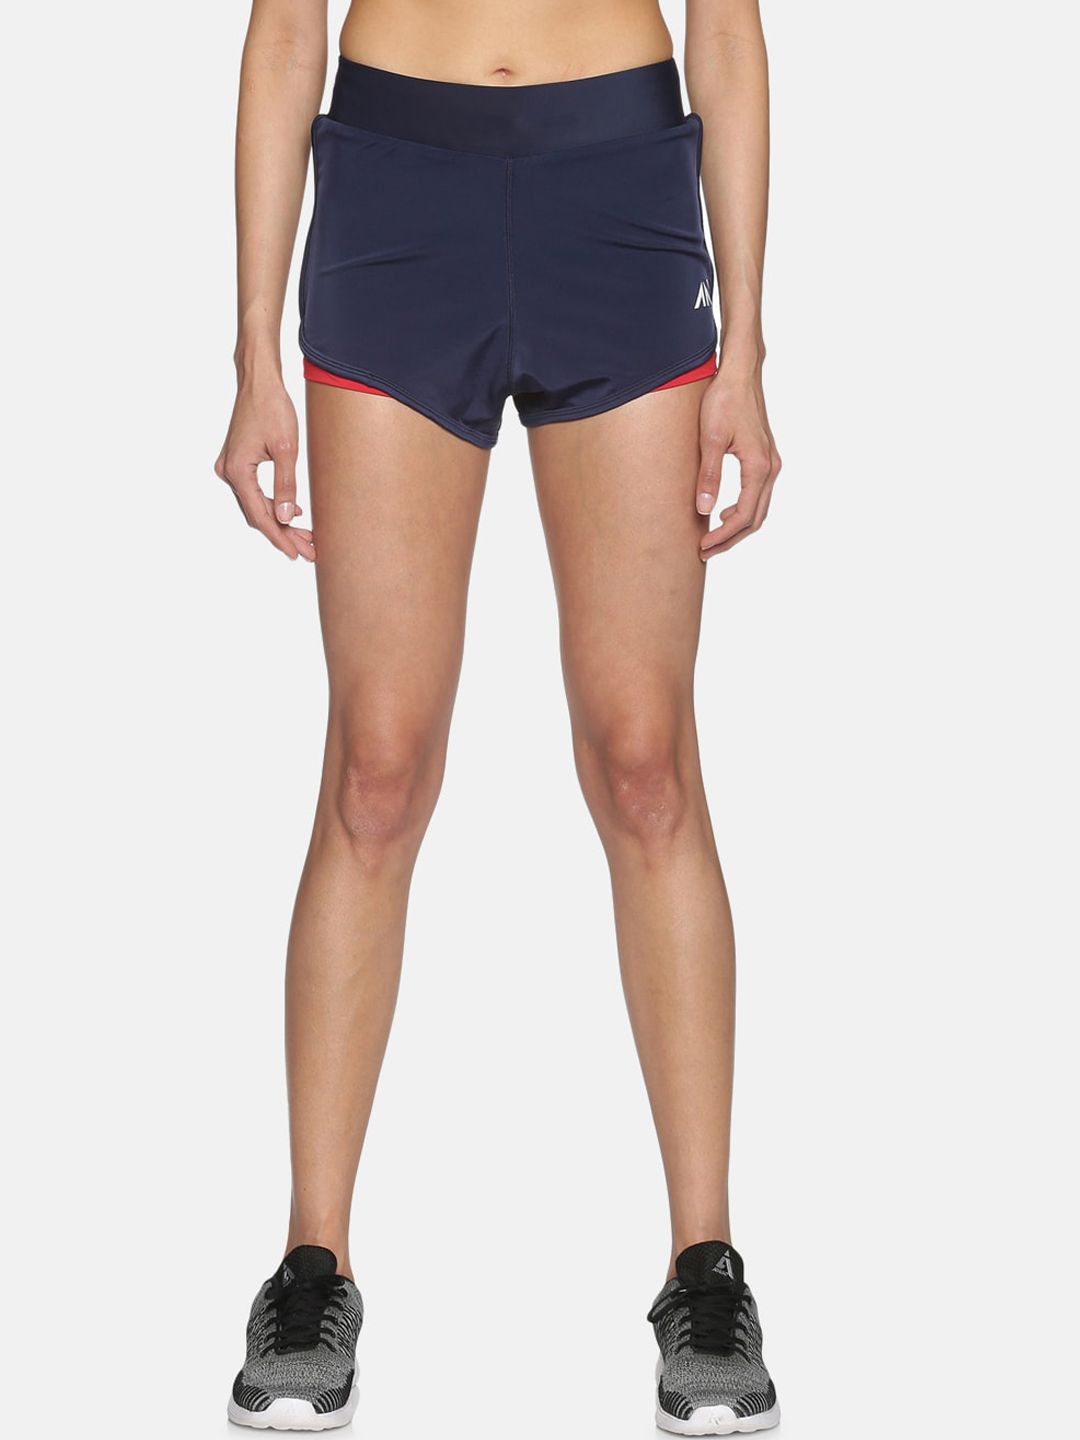 AESTHETIC NATION Women Navy Blue Sports Shorts Price in India